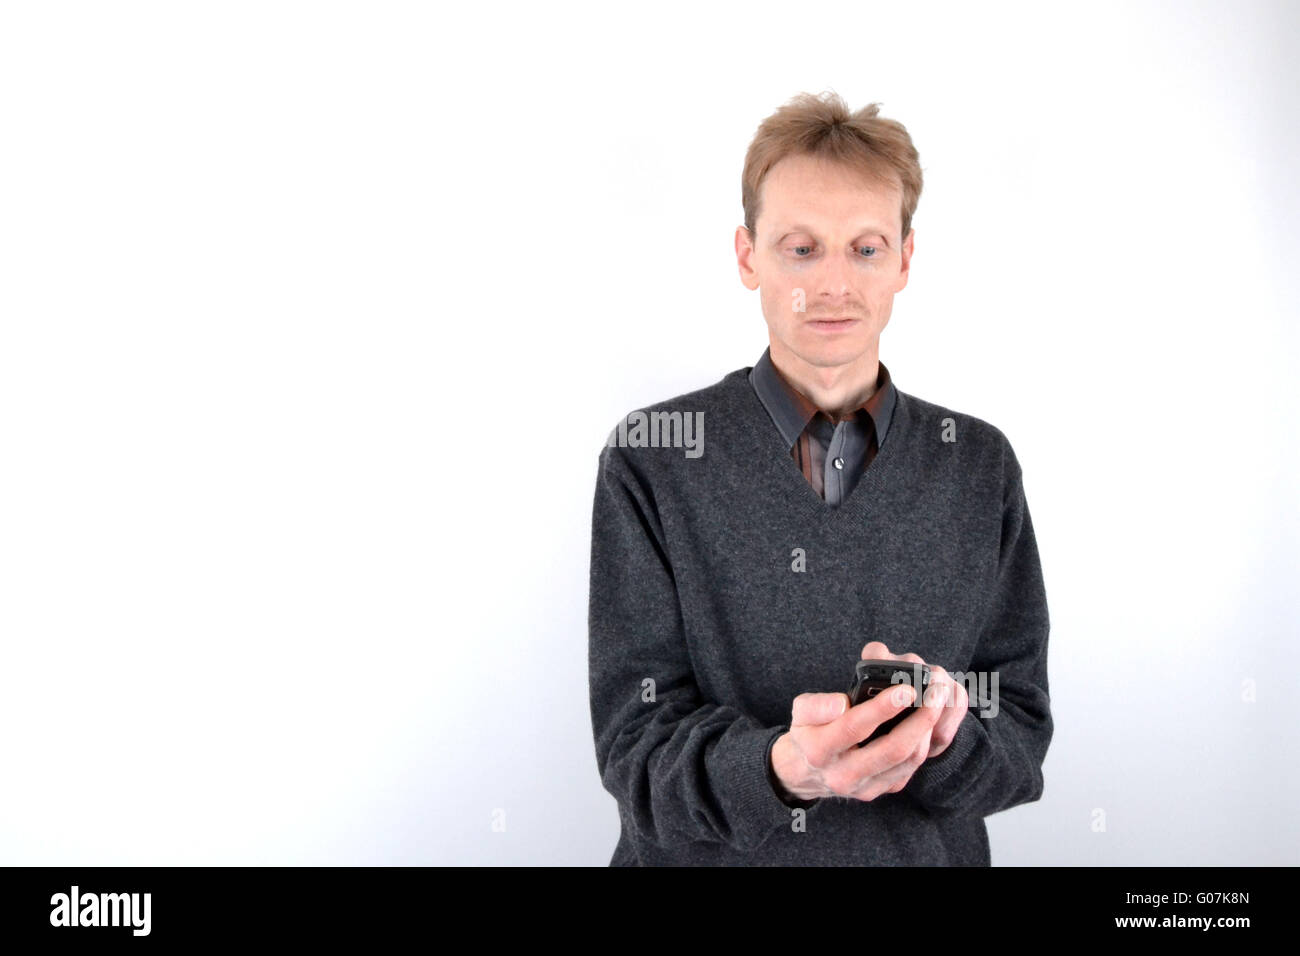 Blond man with mobile phone Stock Photo